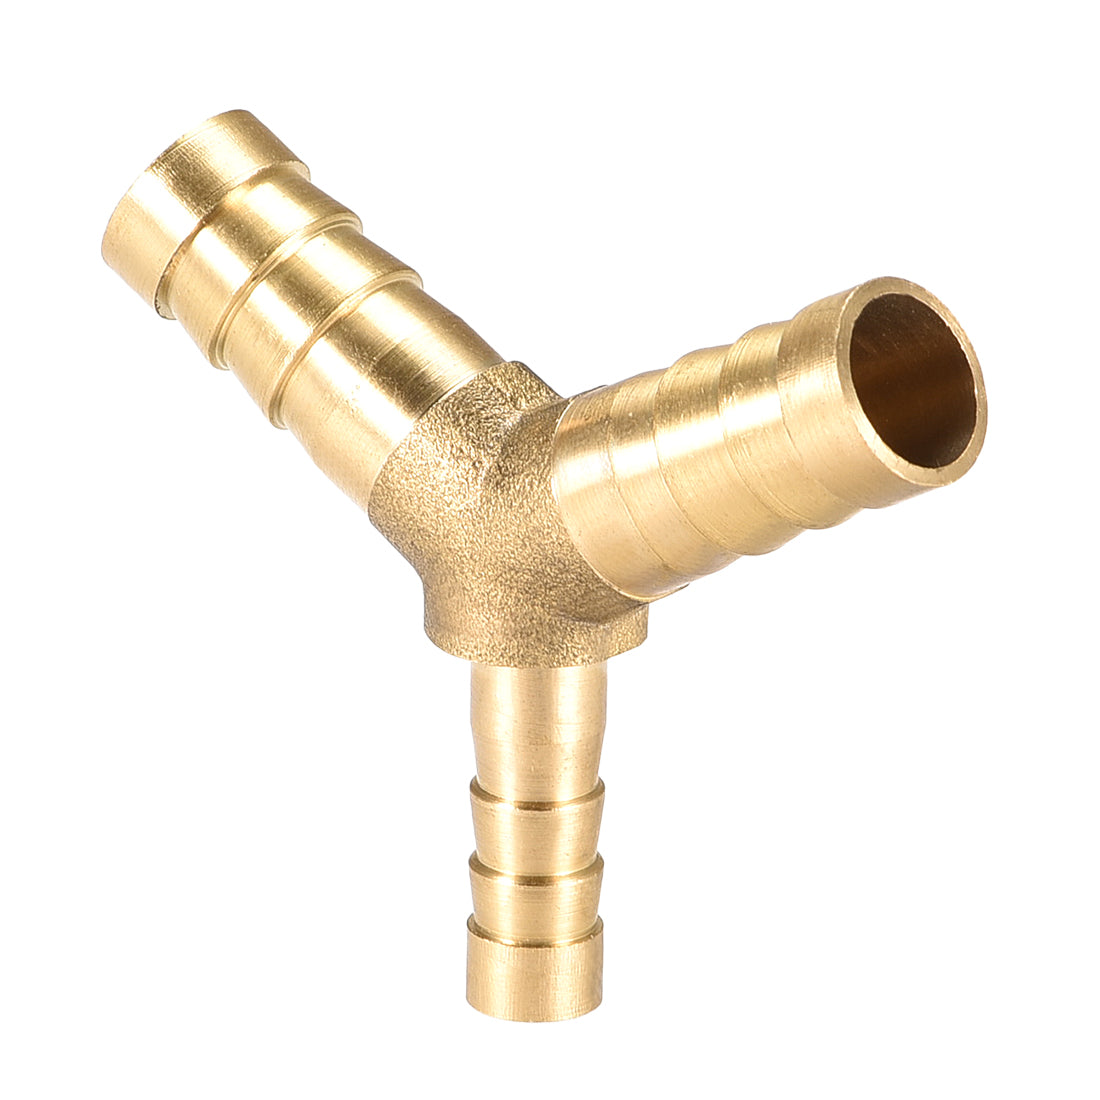 Uxcell Uxcell 8mm x 6mm x 8mm Hose ID Brass Reducer Barb Fitting Y-Shaped 3 Way Tee Connector Adapter 2pcs